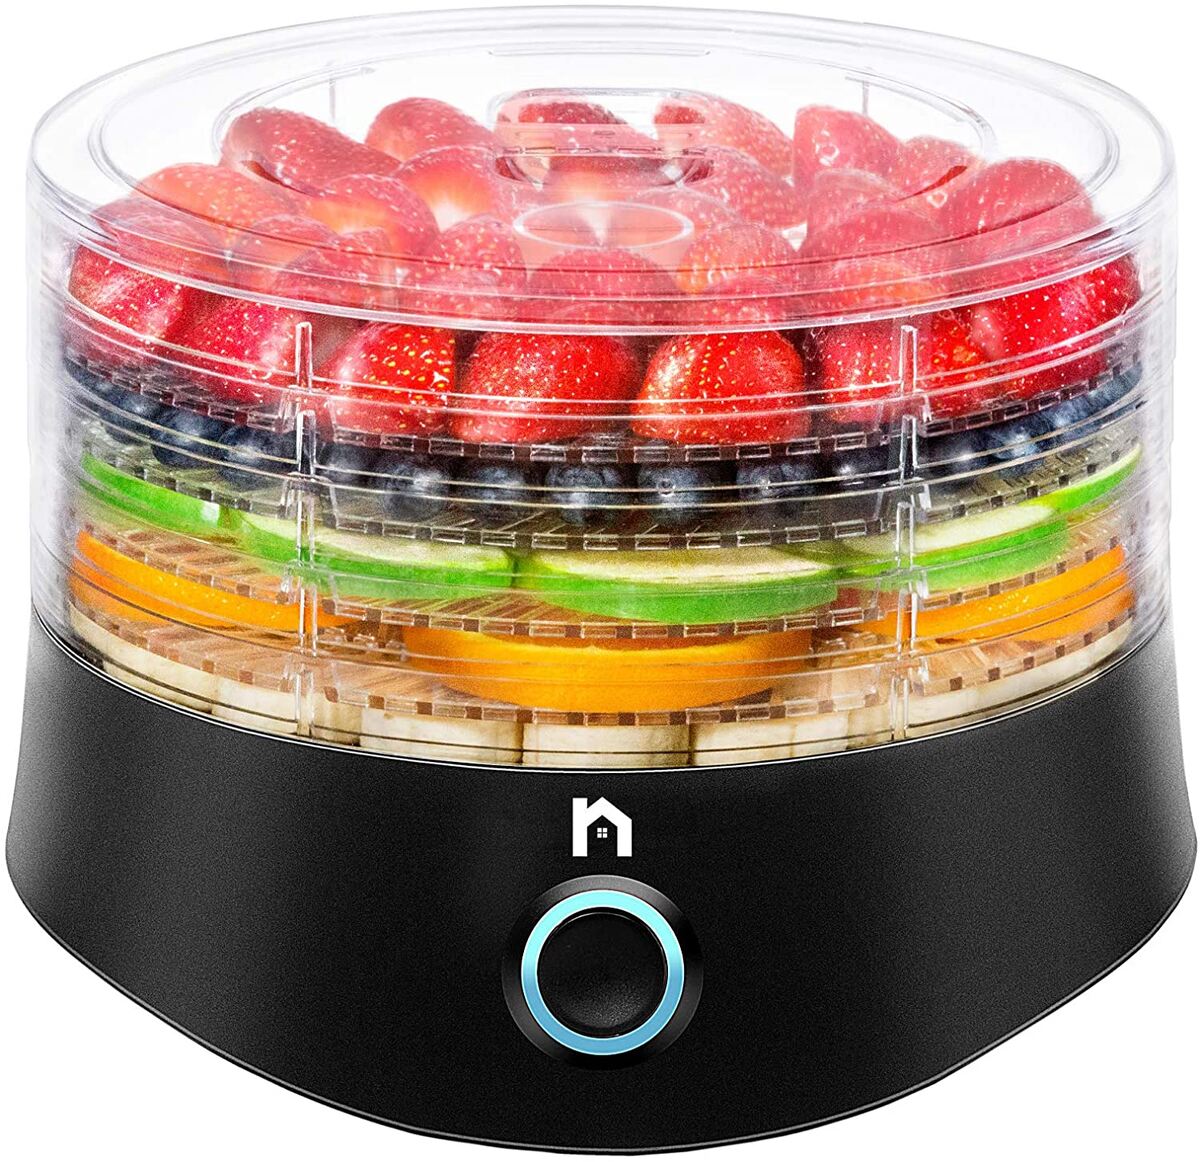 How Does A Food Dehydrator Work